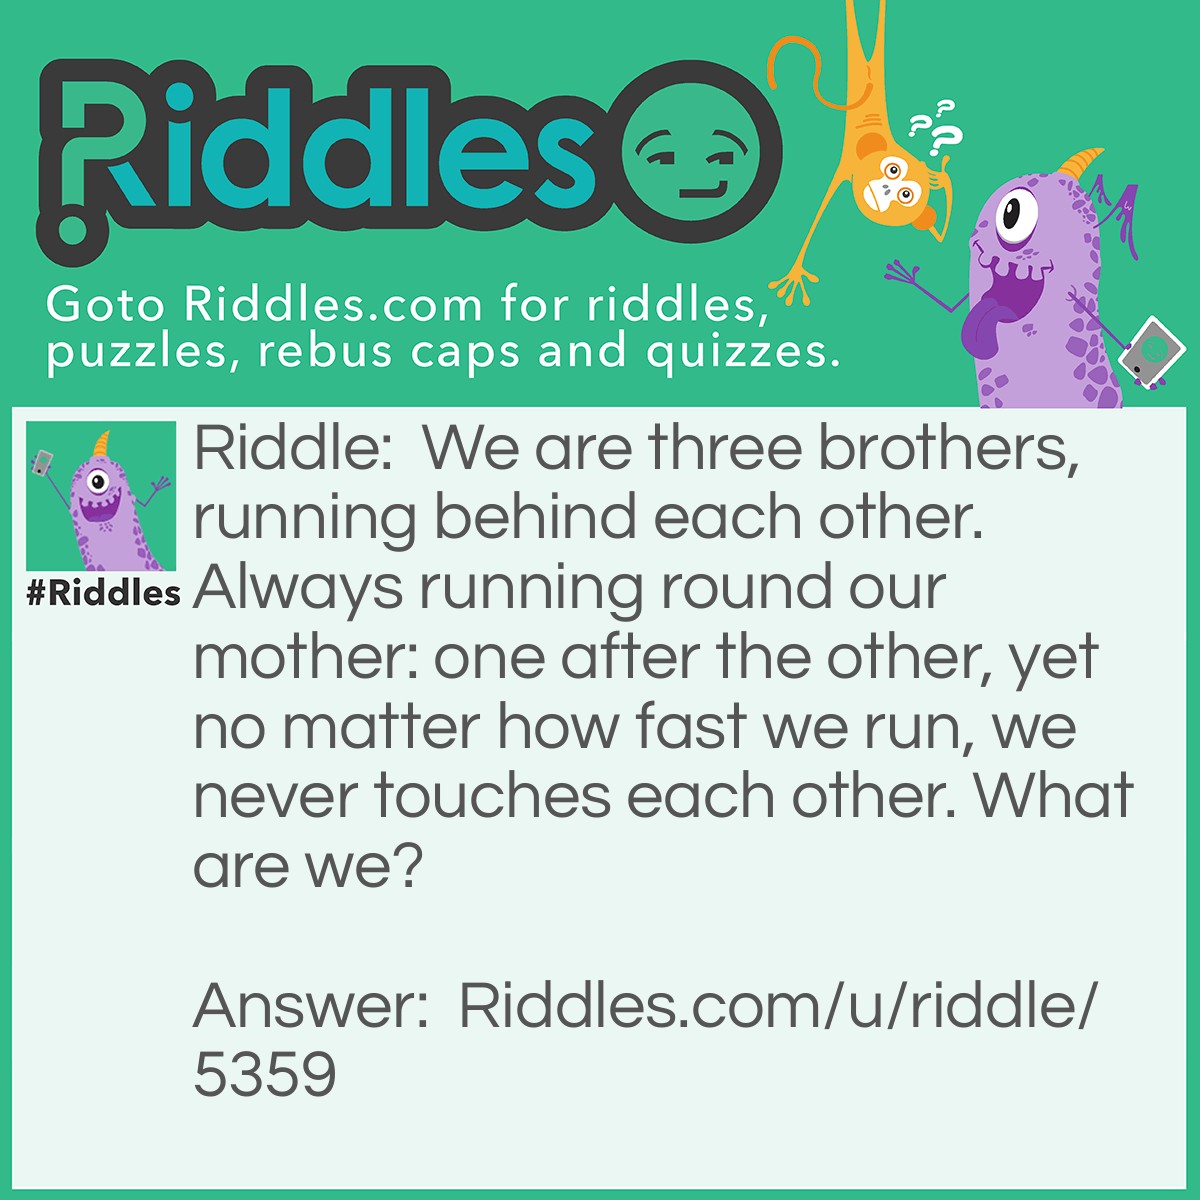 Riddle: We are three brothers, running behind each other. Always running round our mother: one after the other, yet no matter how fast we run, we never touches each other. What are we? Answer: Fan blades.